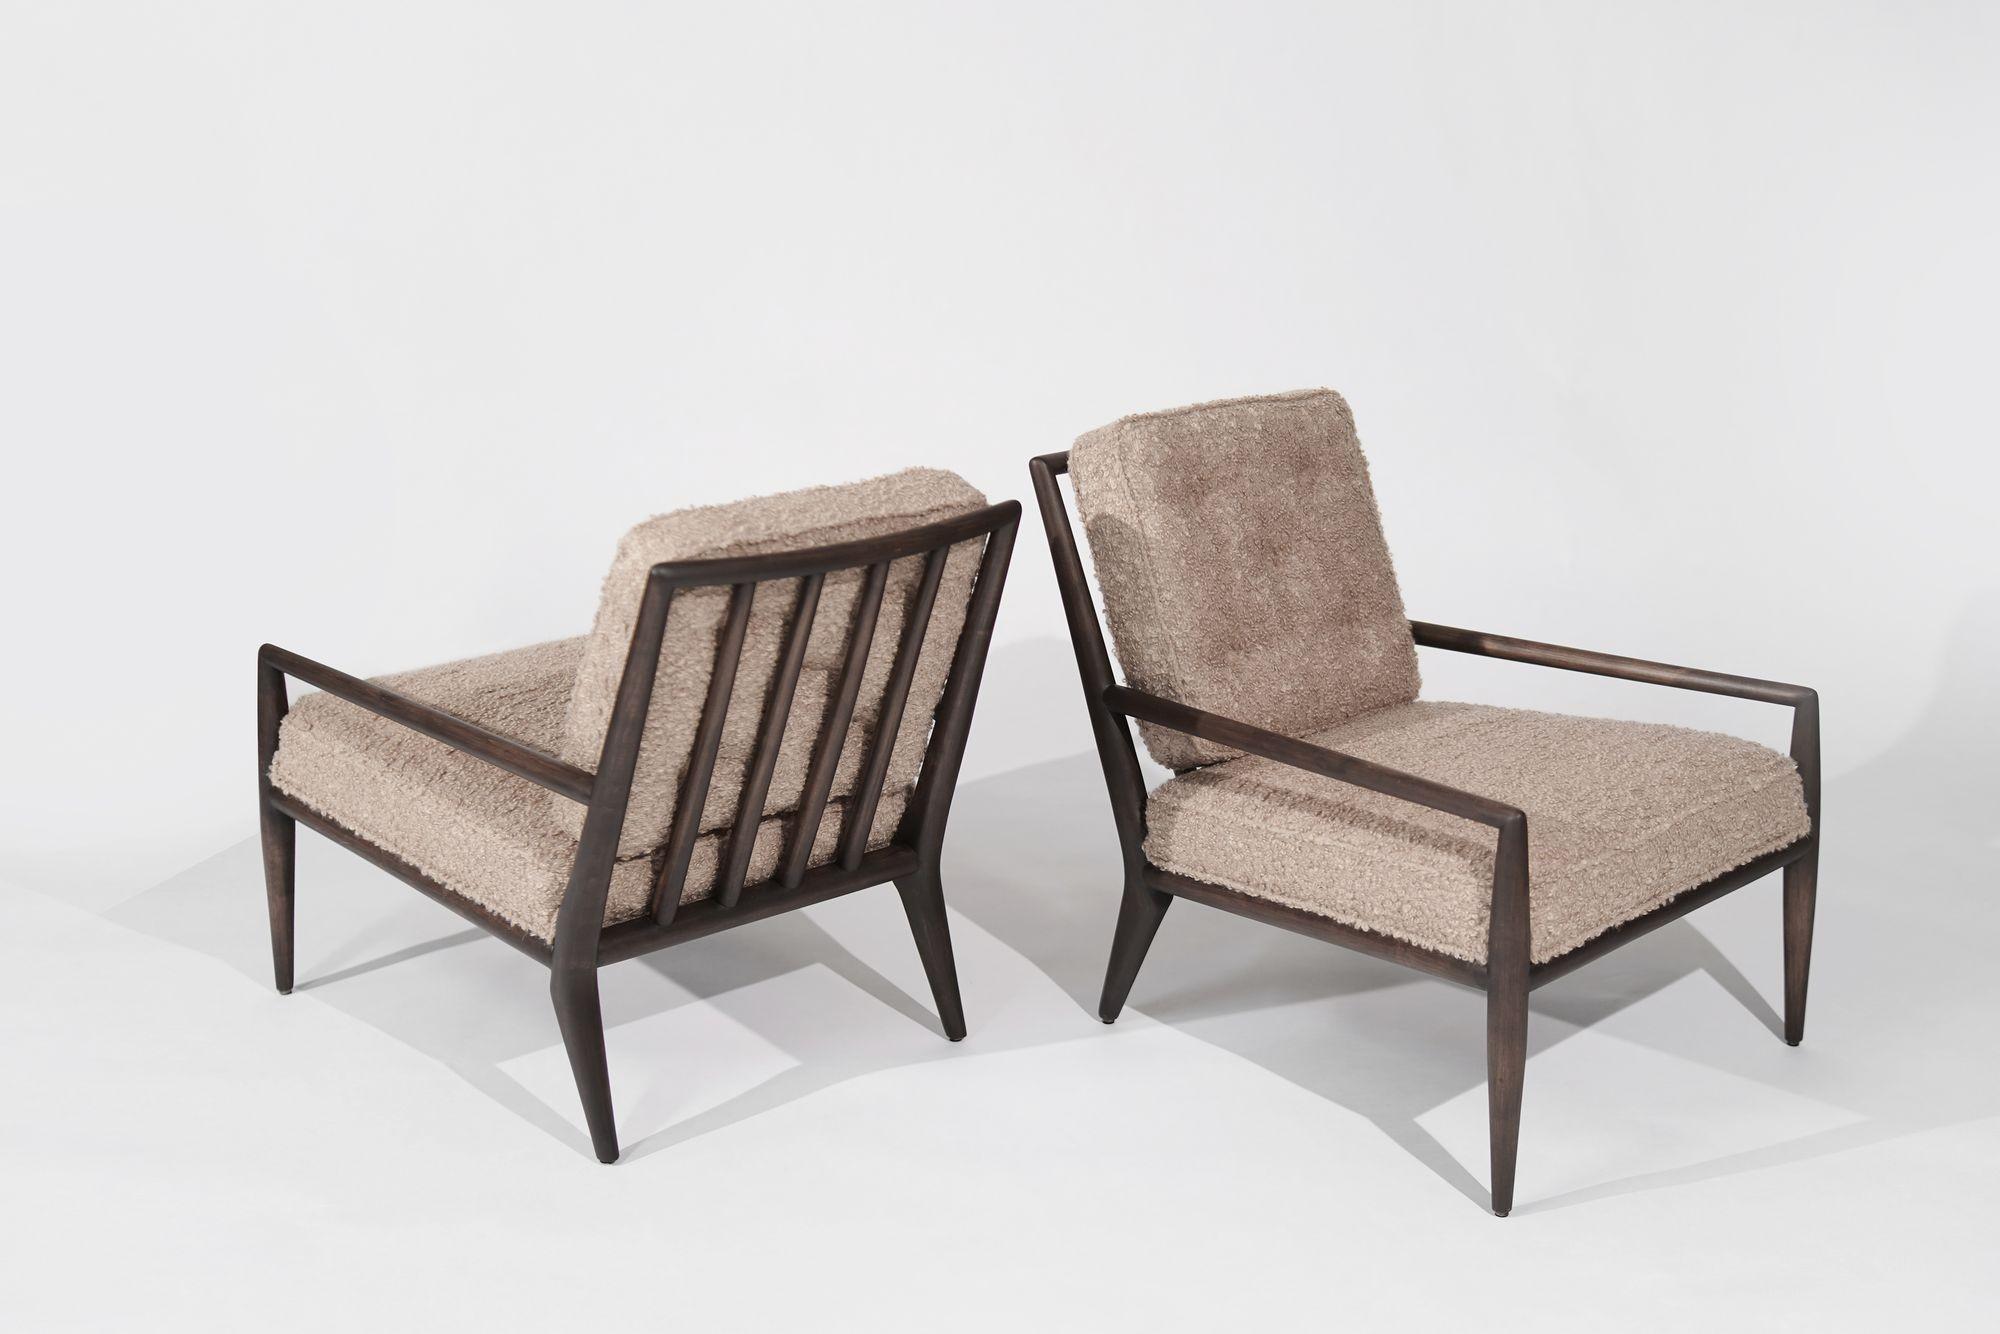 20th Century Set of Lounge Chairs in Teddy Boucle by T.H. Robsjohn-Gibbings, C. 1950s For Sale